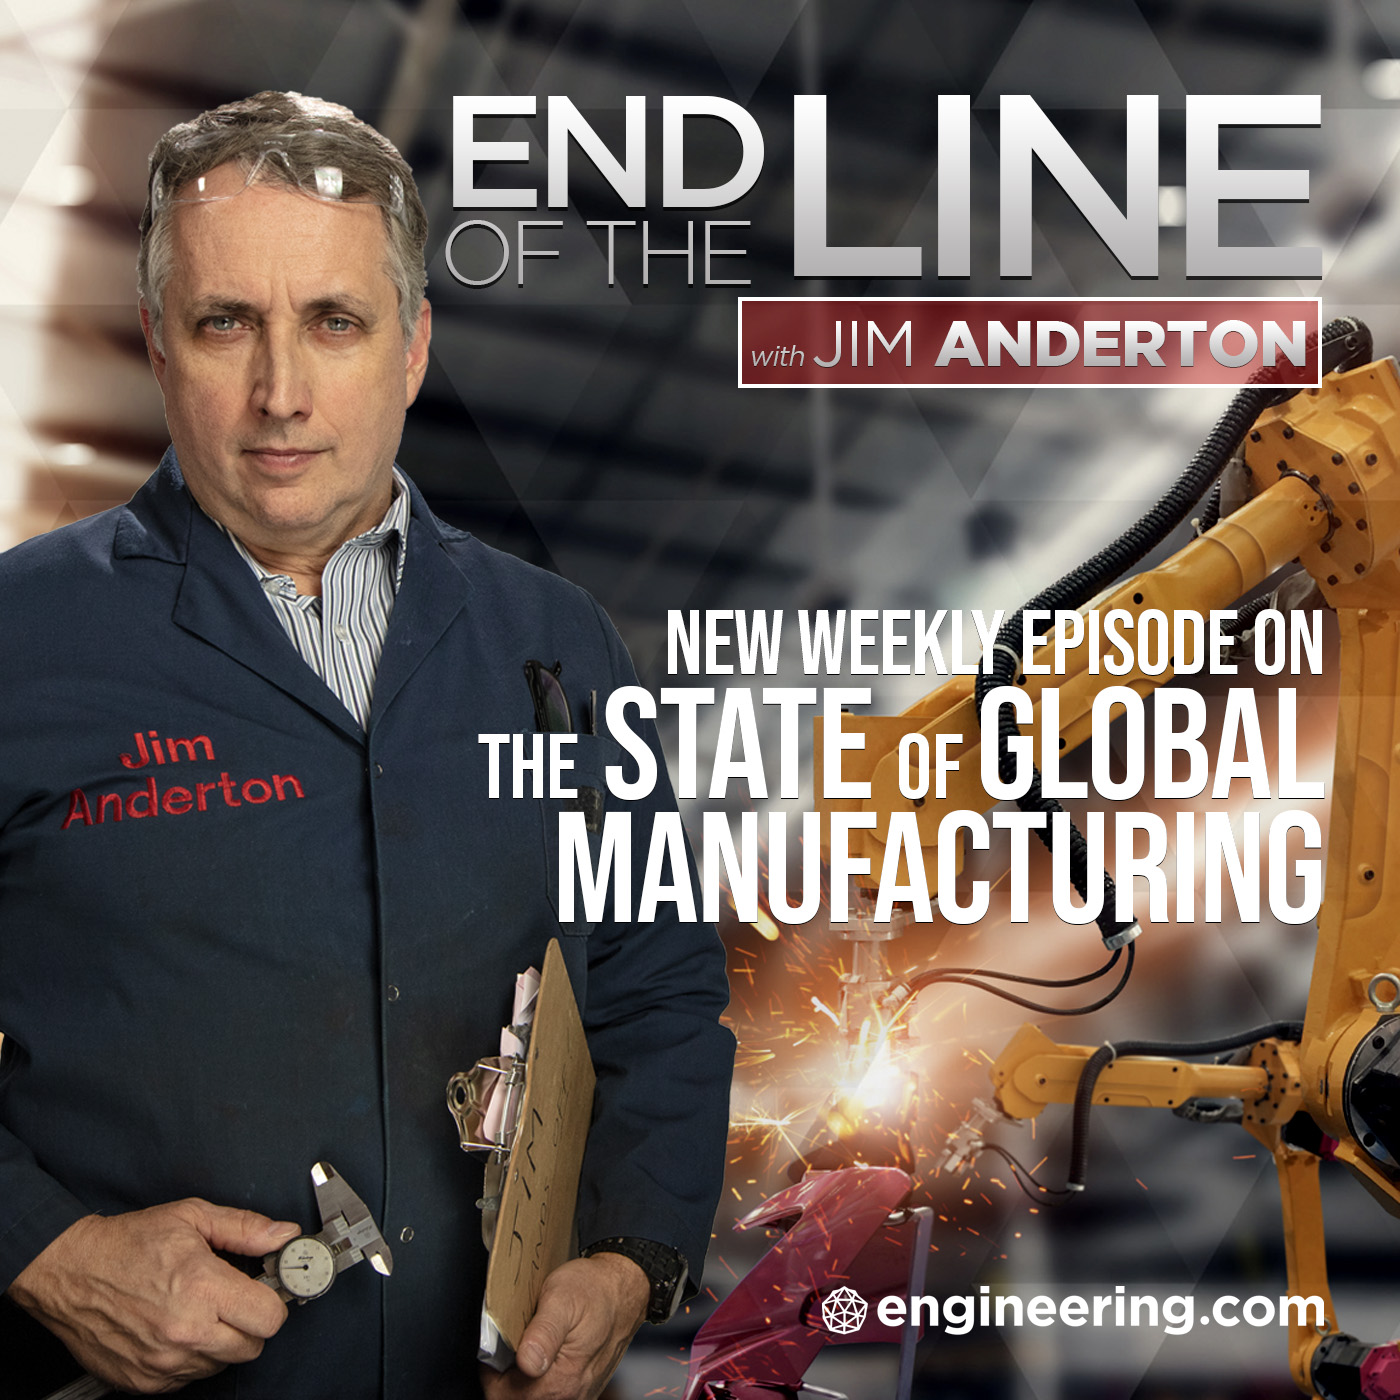 Artwork for End of the Line